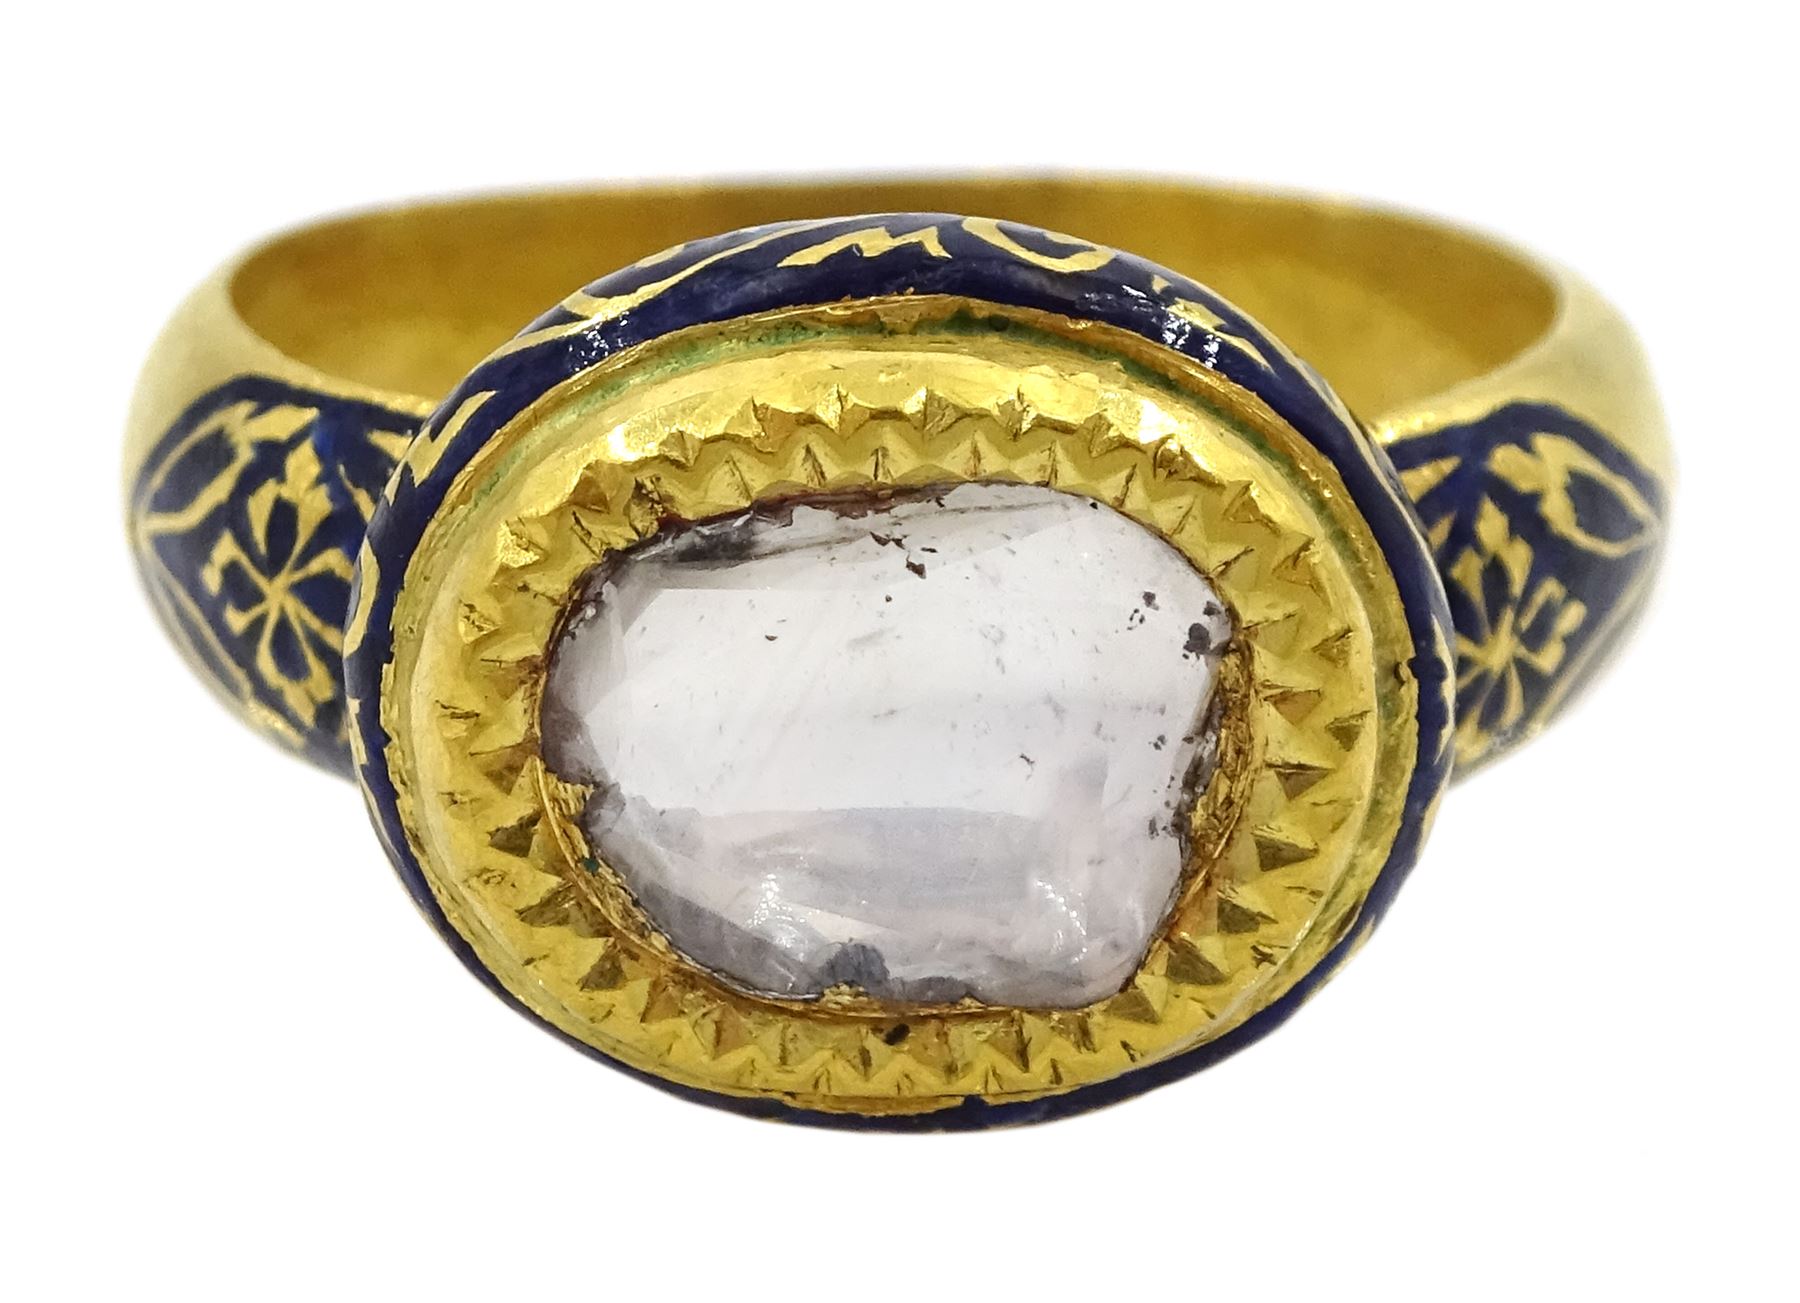 Late 19th/early 20th century gold Indian table cut diamond ring